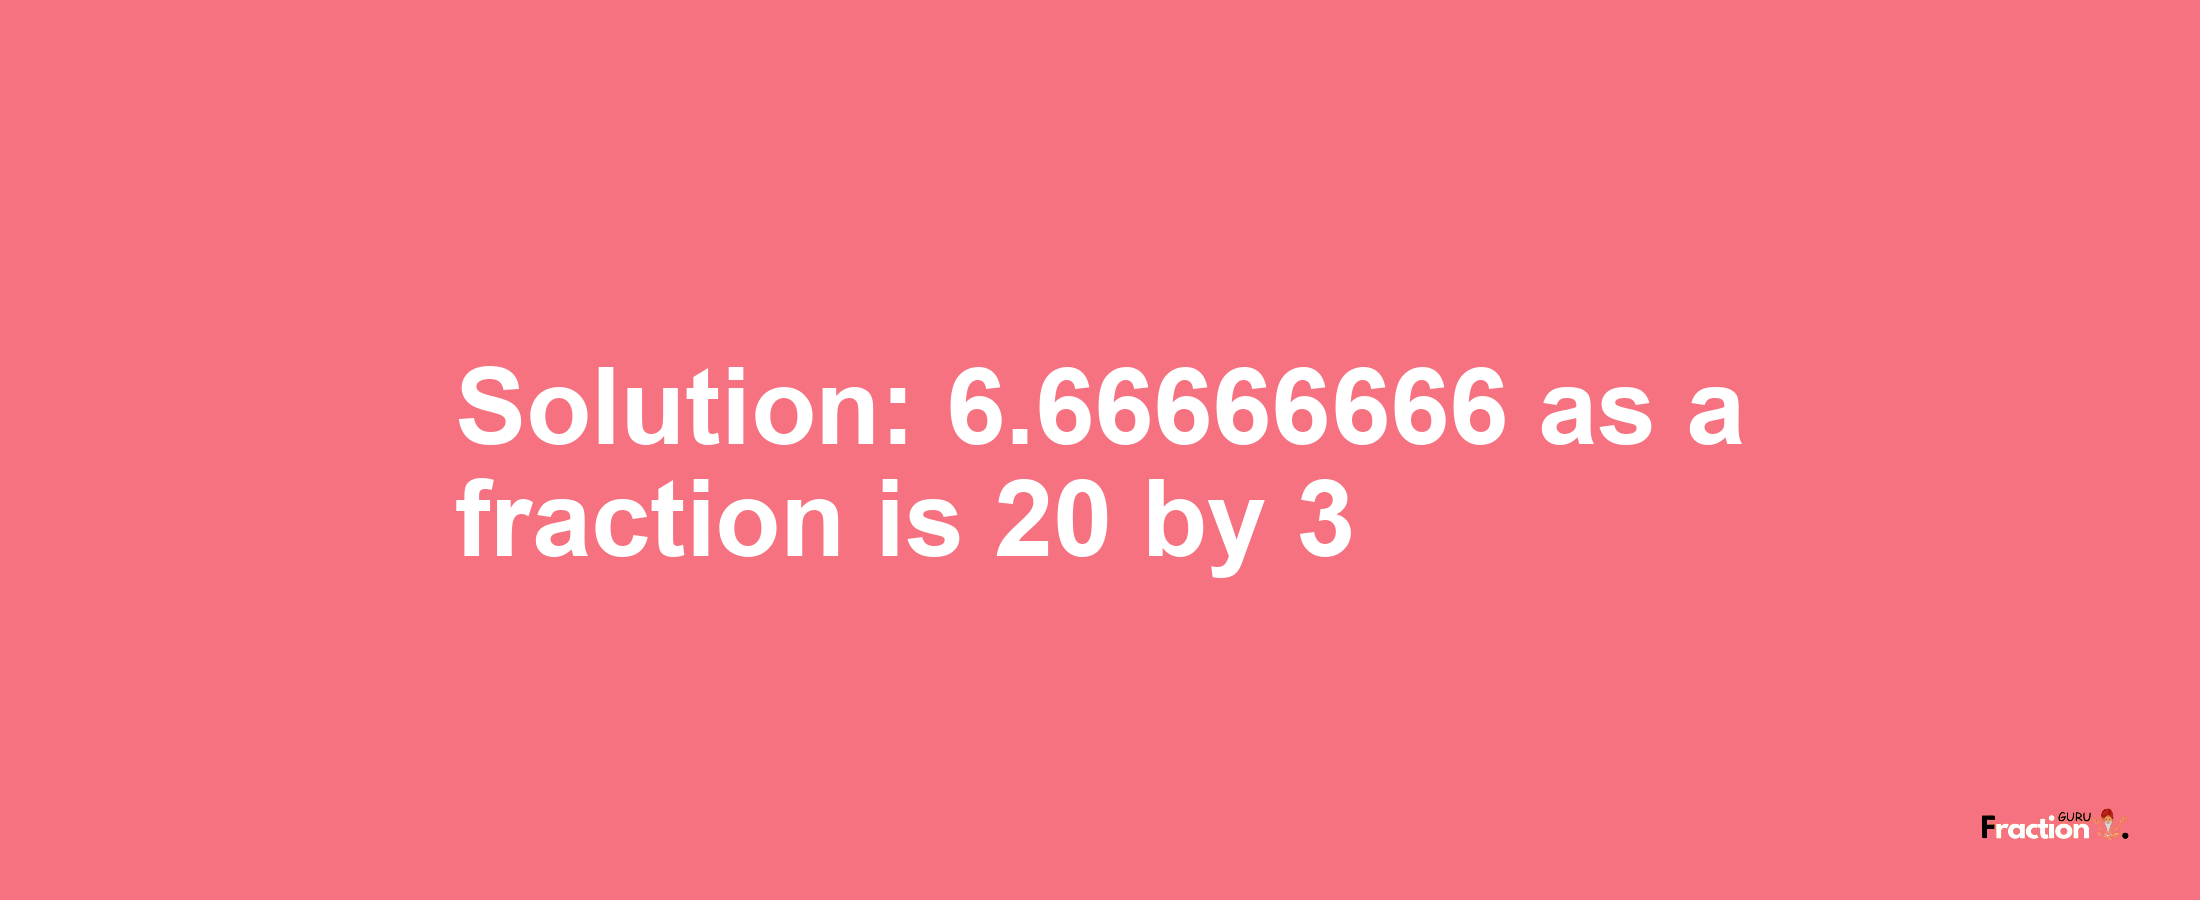 Solution:6.66666666 as a fraction is 20/3